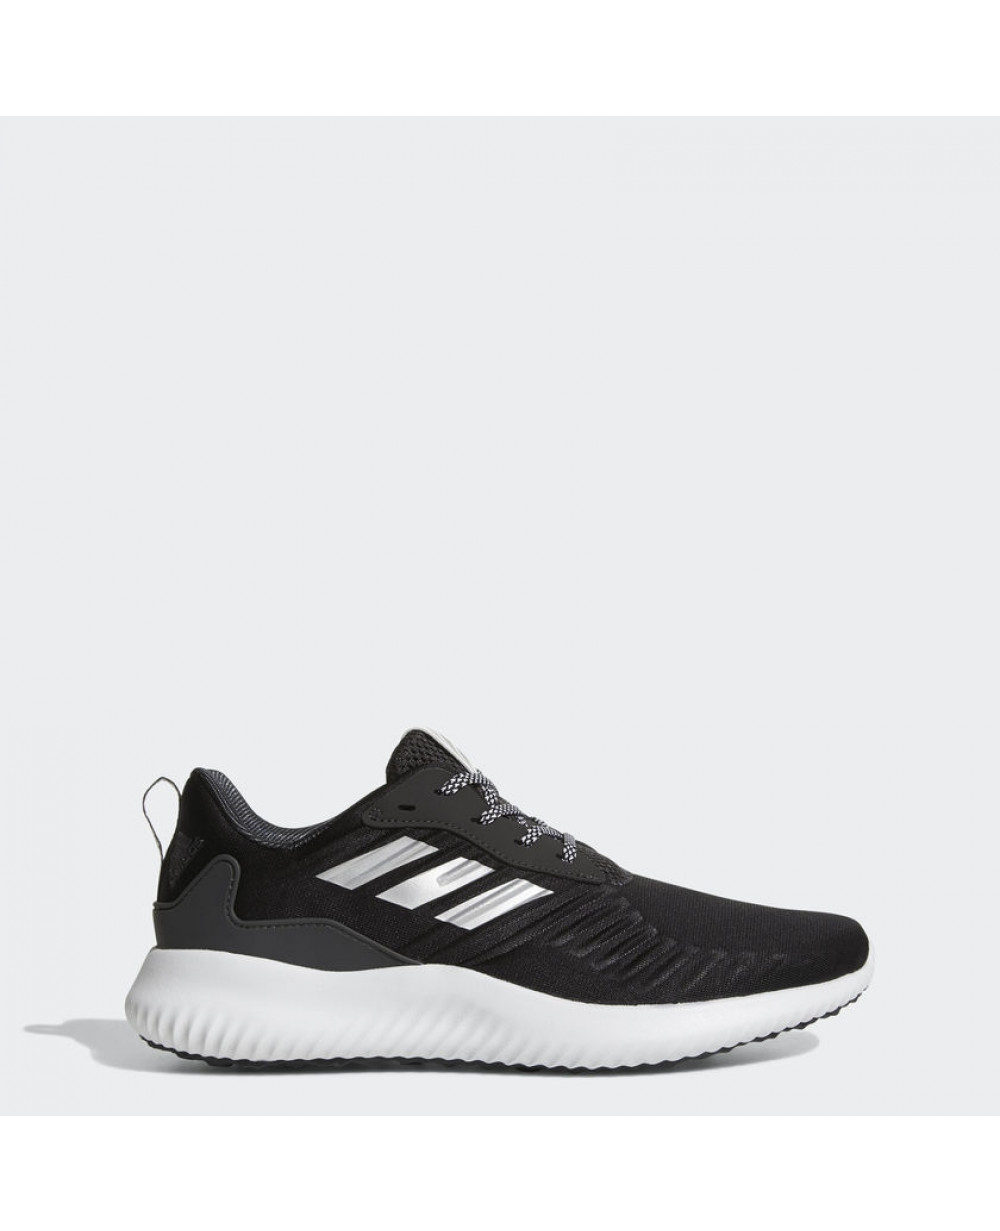 are adidas bounce good running shoes